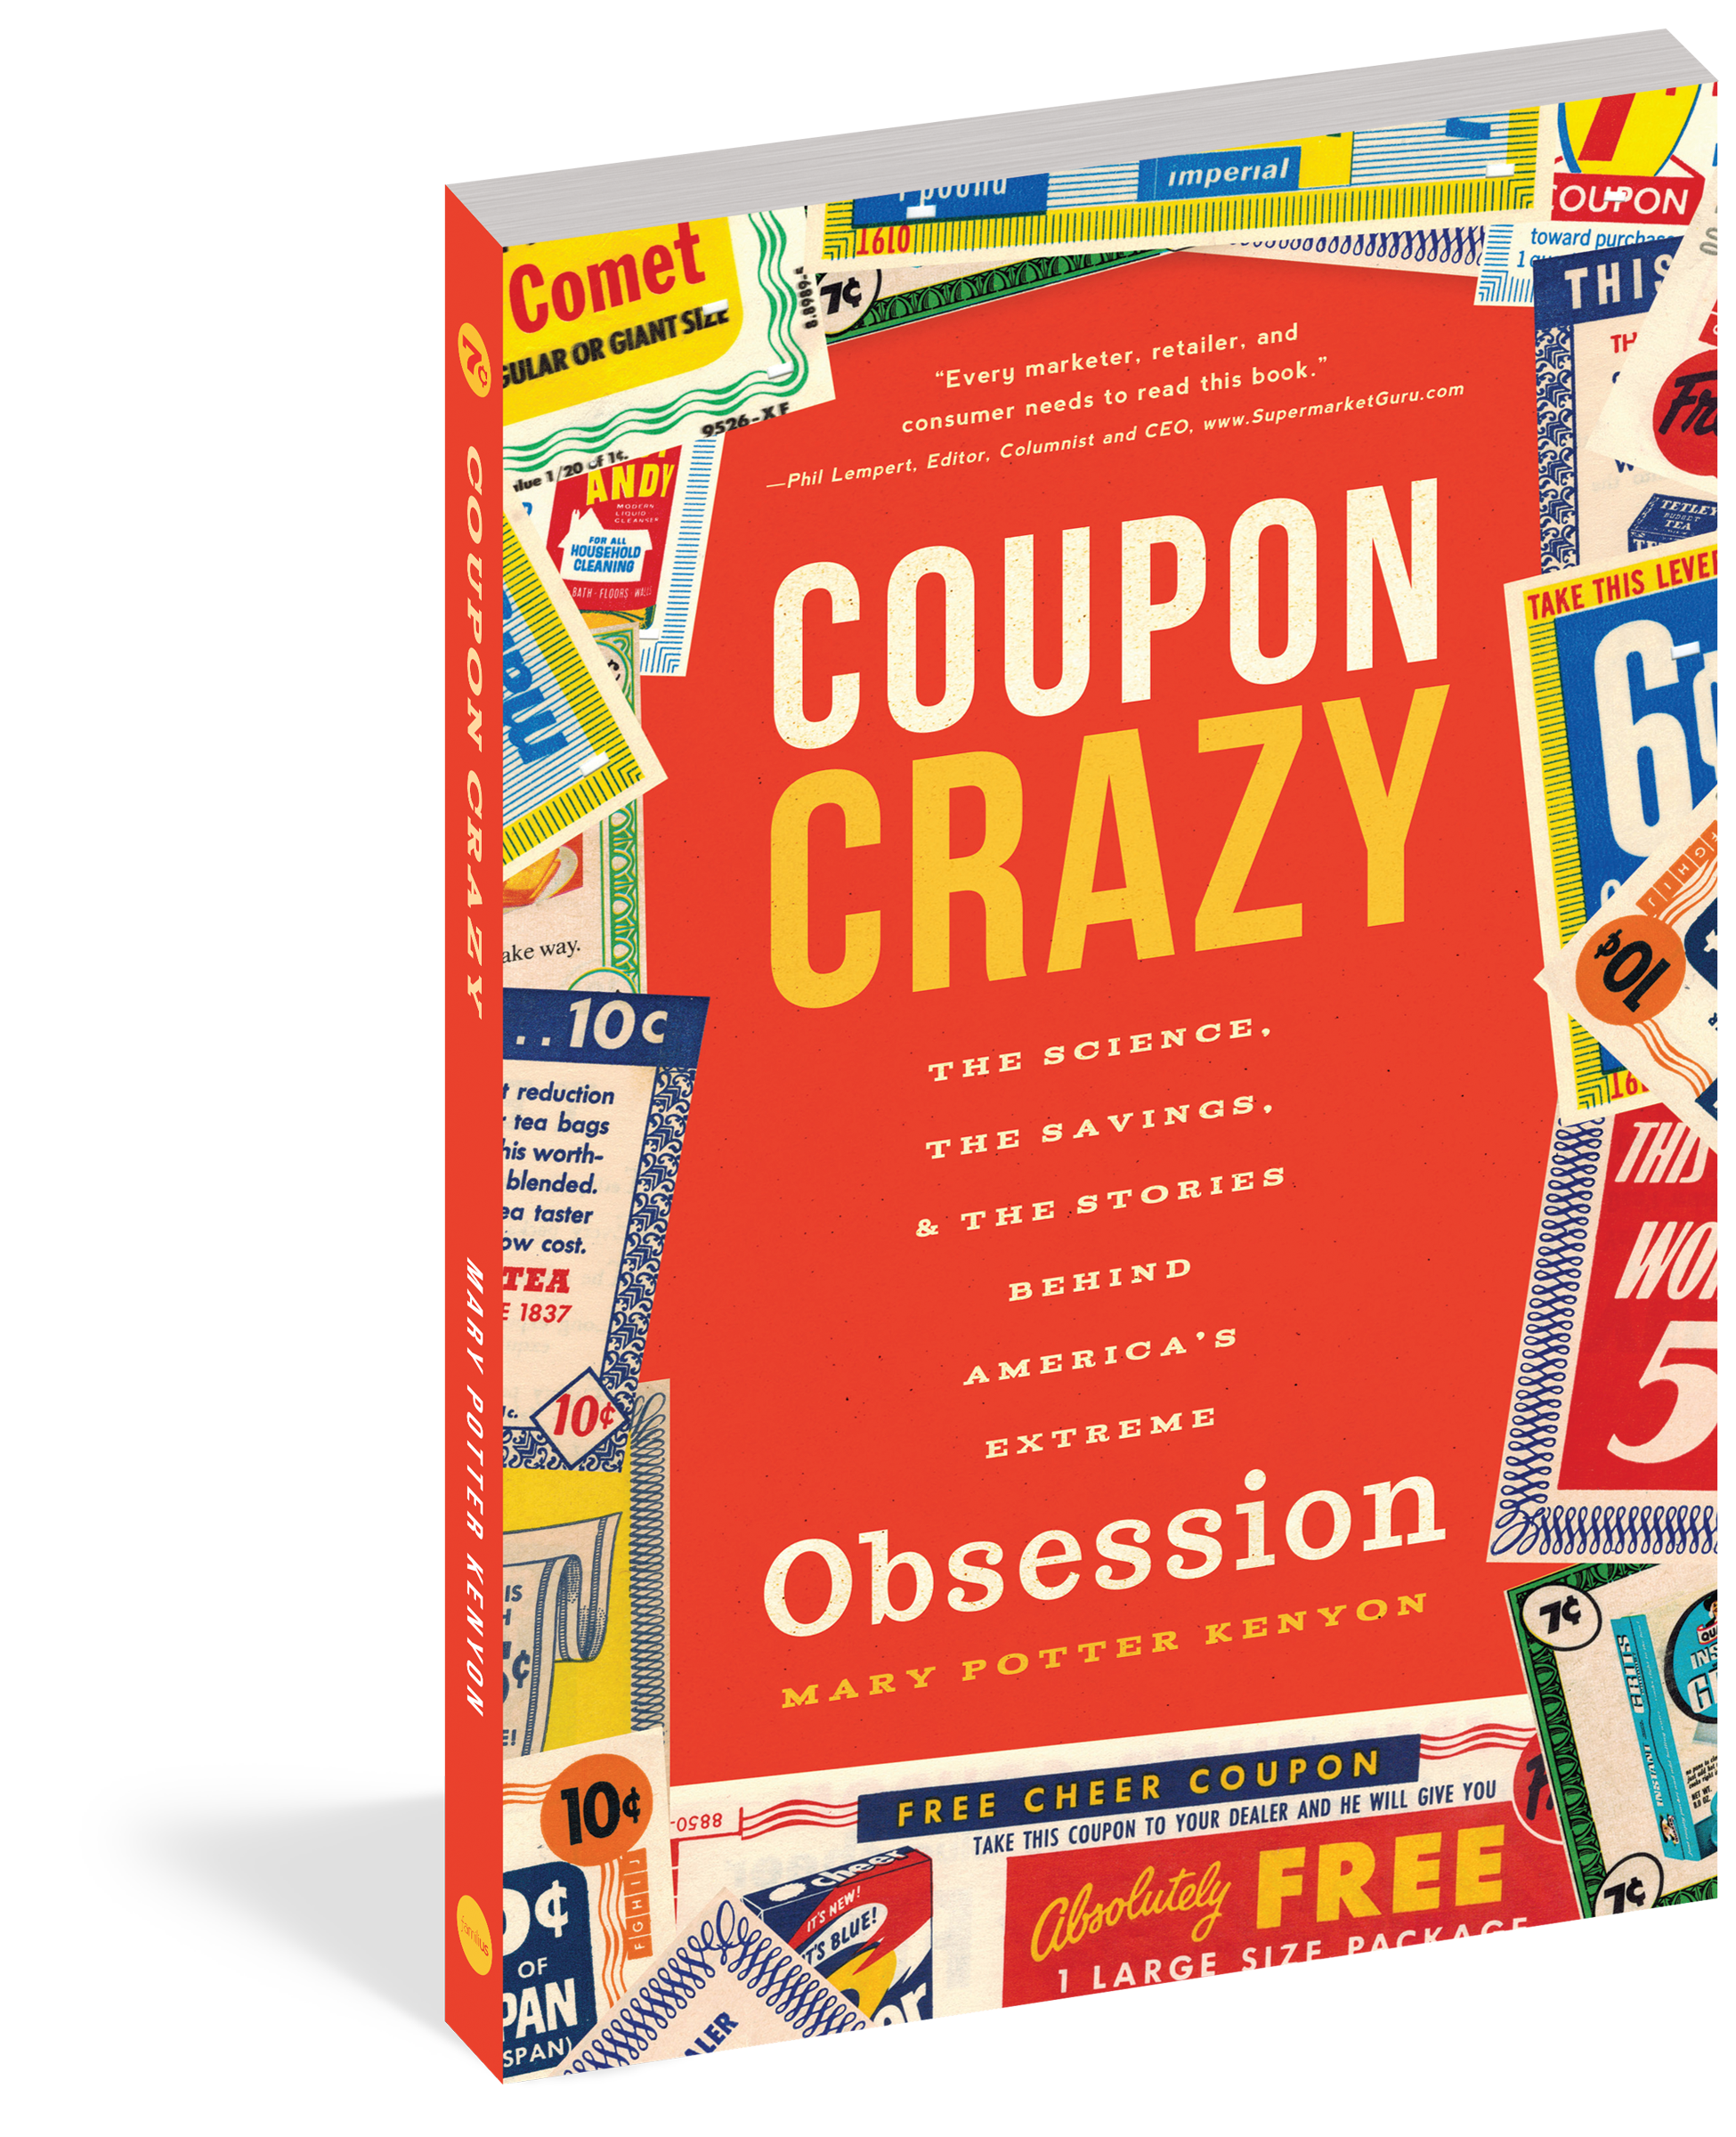 The cover of the book Coupon Crazy.